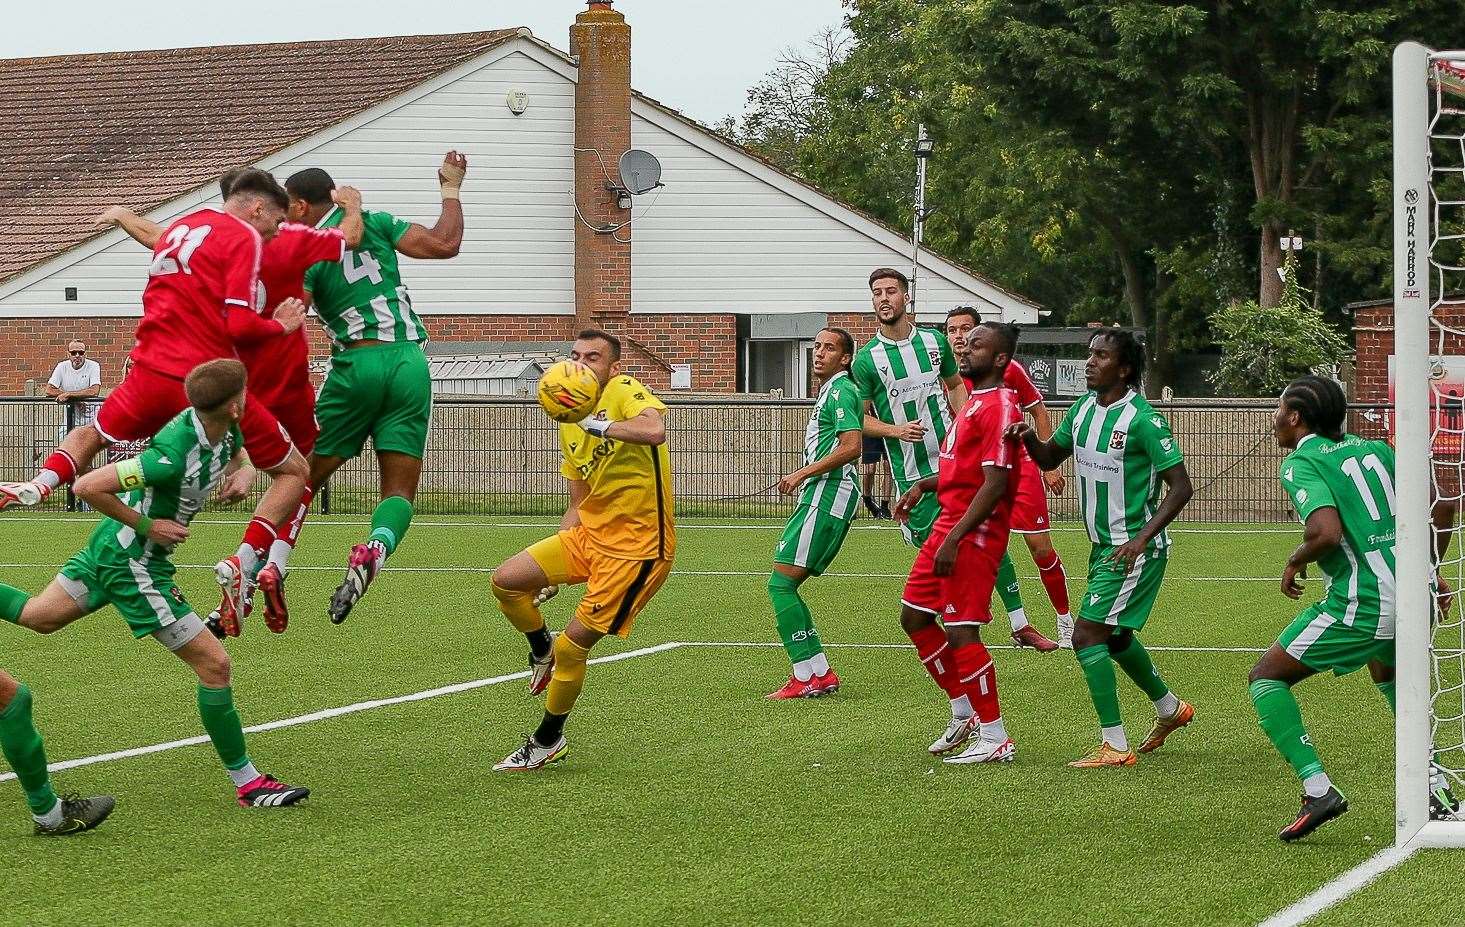 Harvey Smith heads home for Whitstable against Rusthall - but Saturday’s game was later abandoned after injury to away keeper Stefanos Akras. Picture: Les Biggs